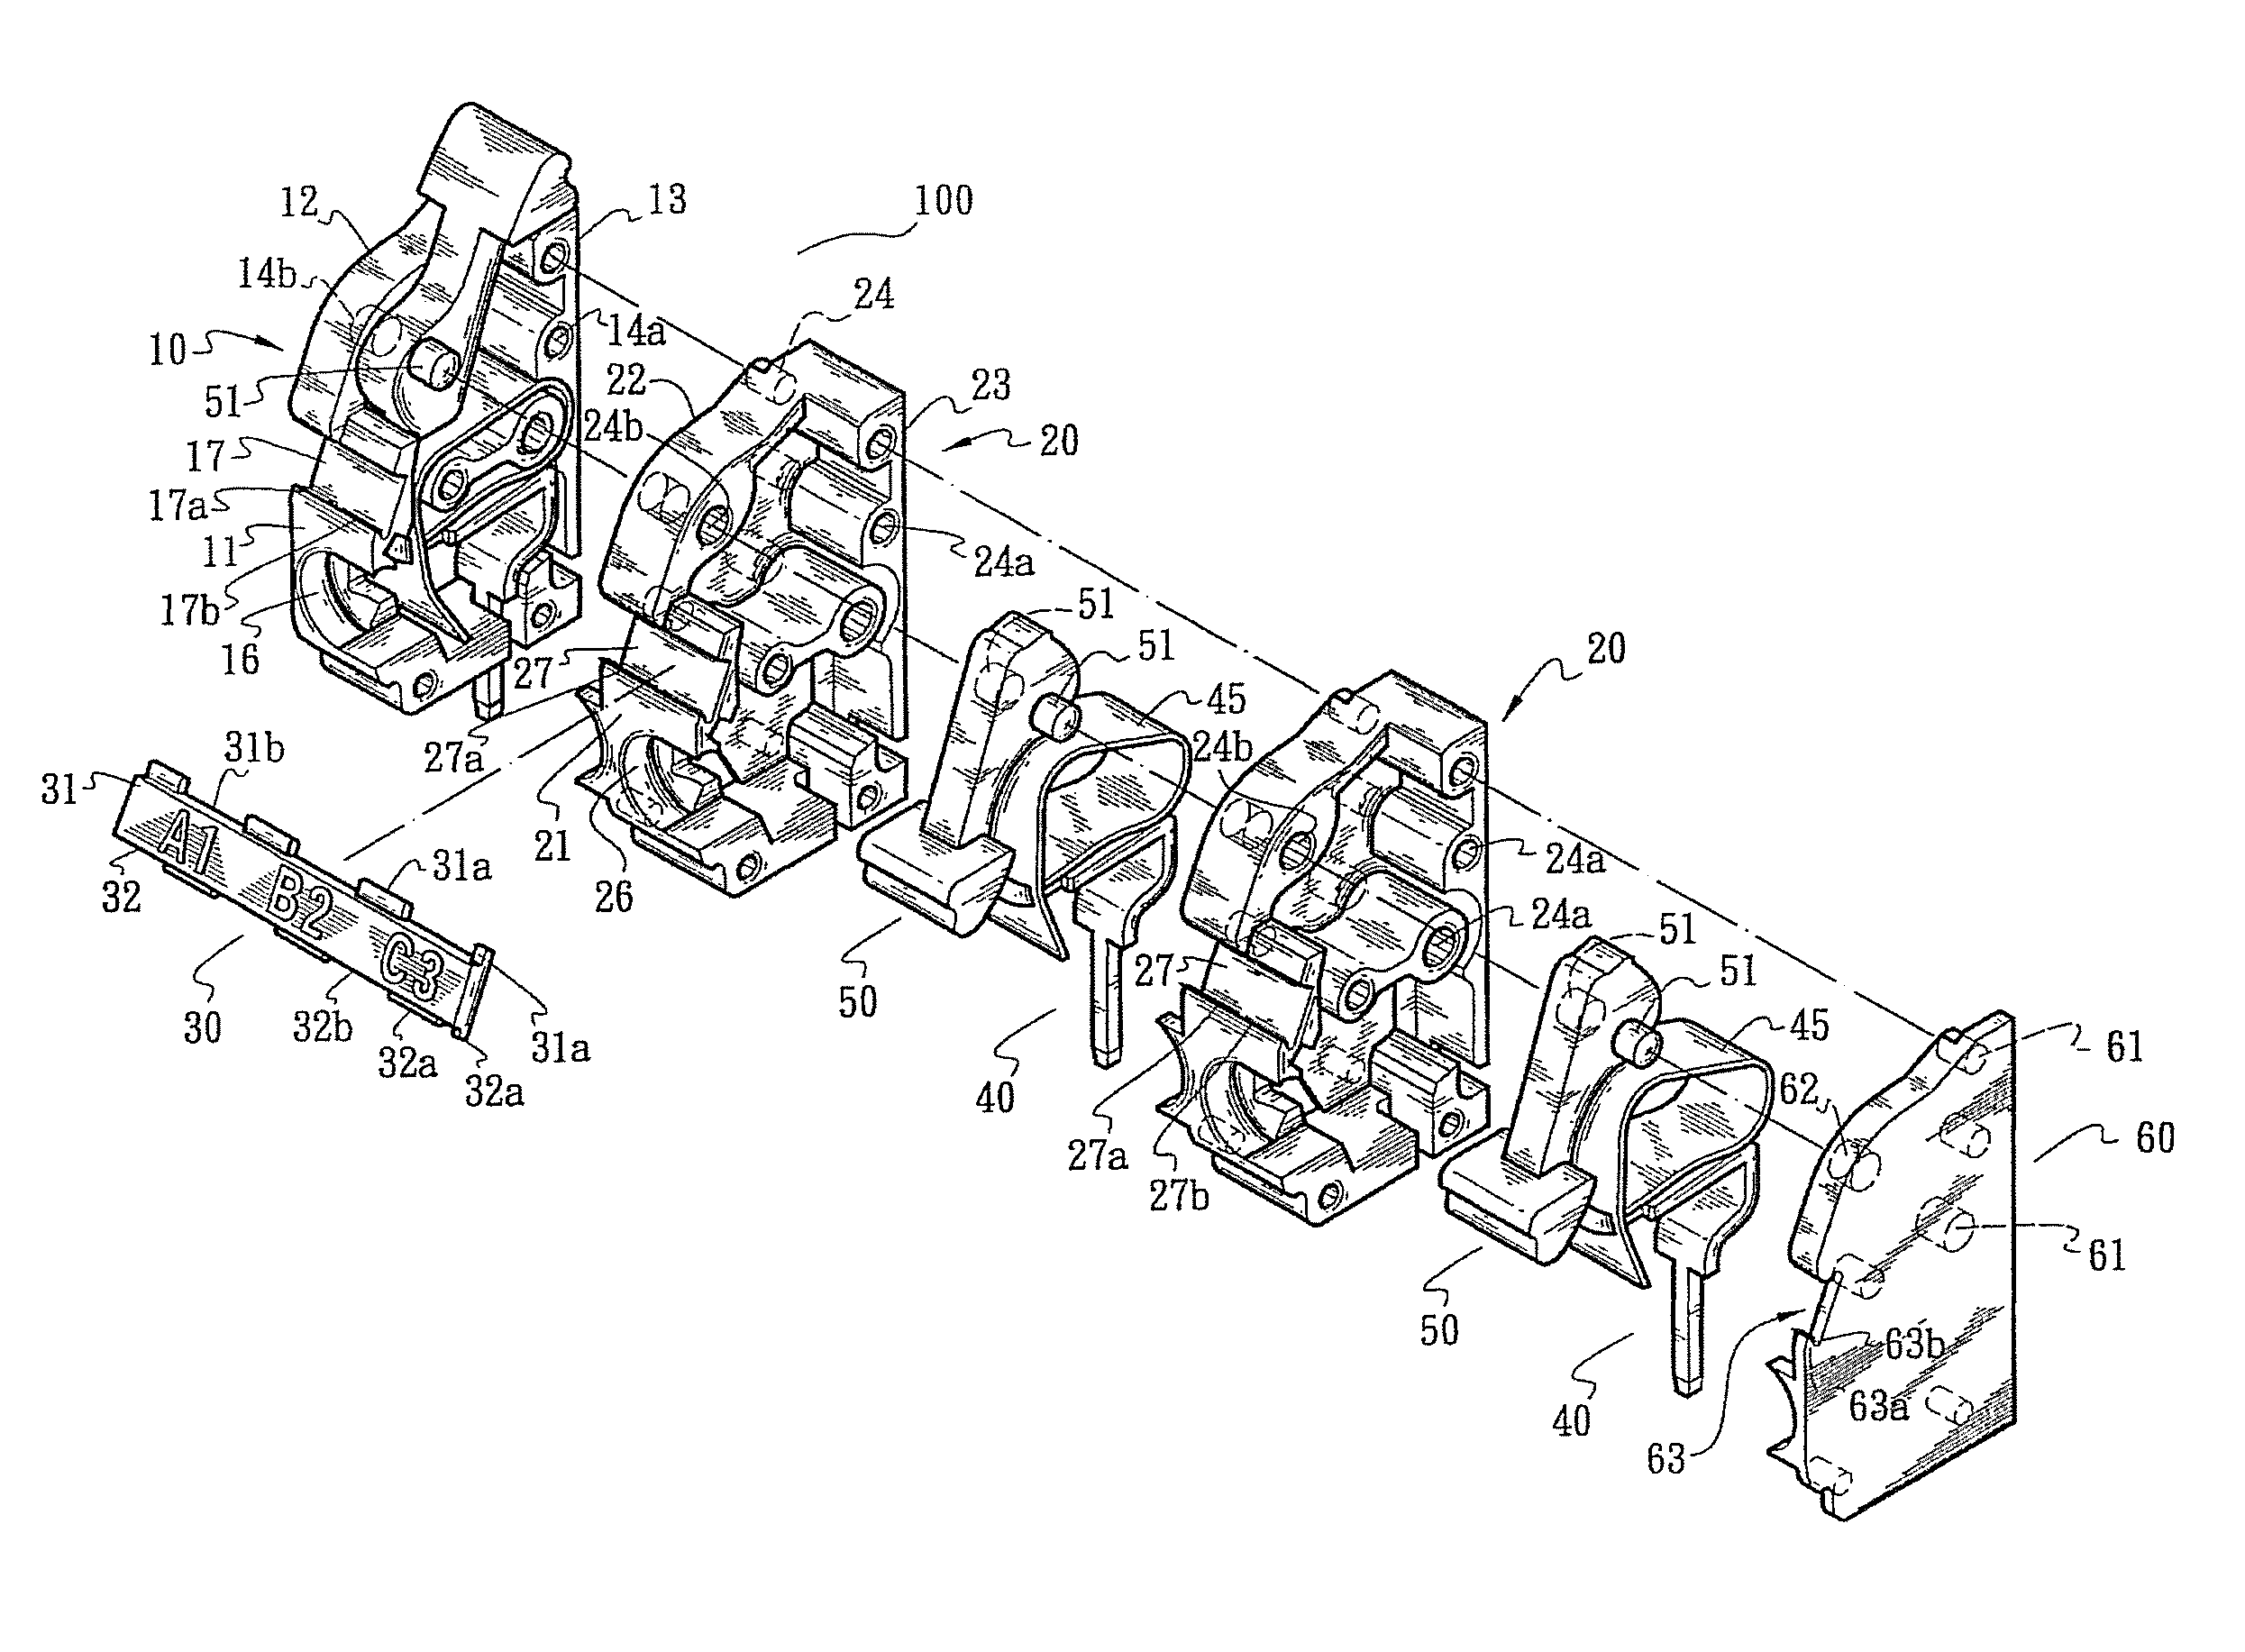 Connection member and lead terminal seat structure with the connection member